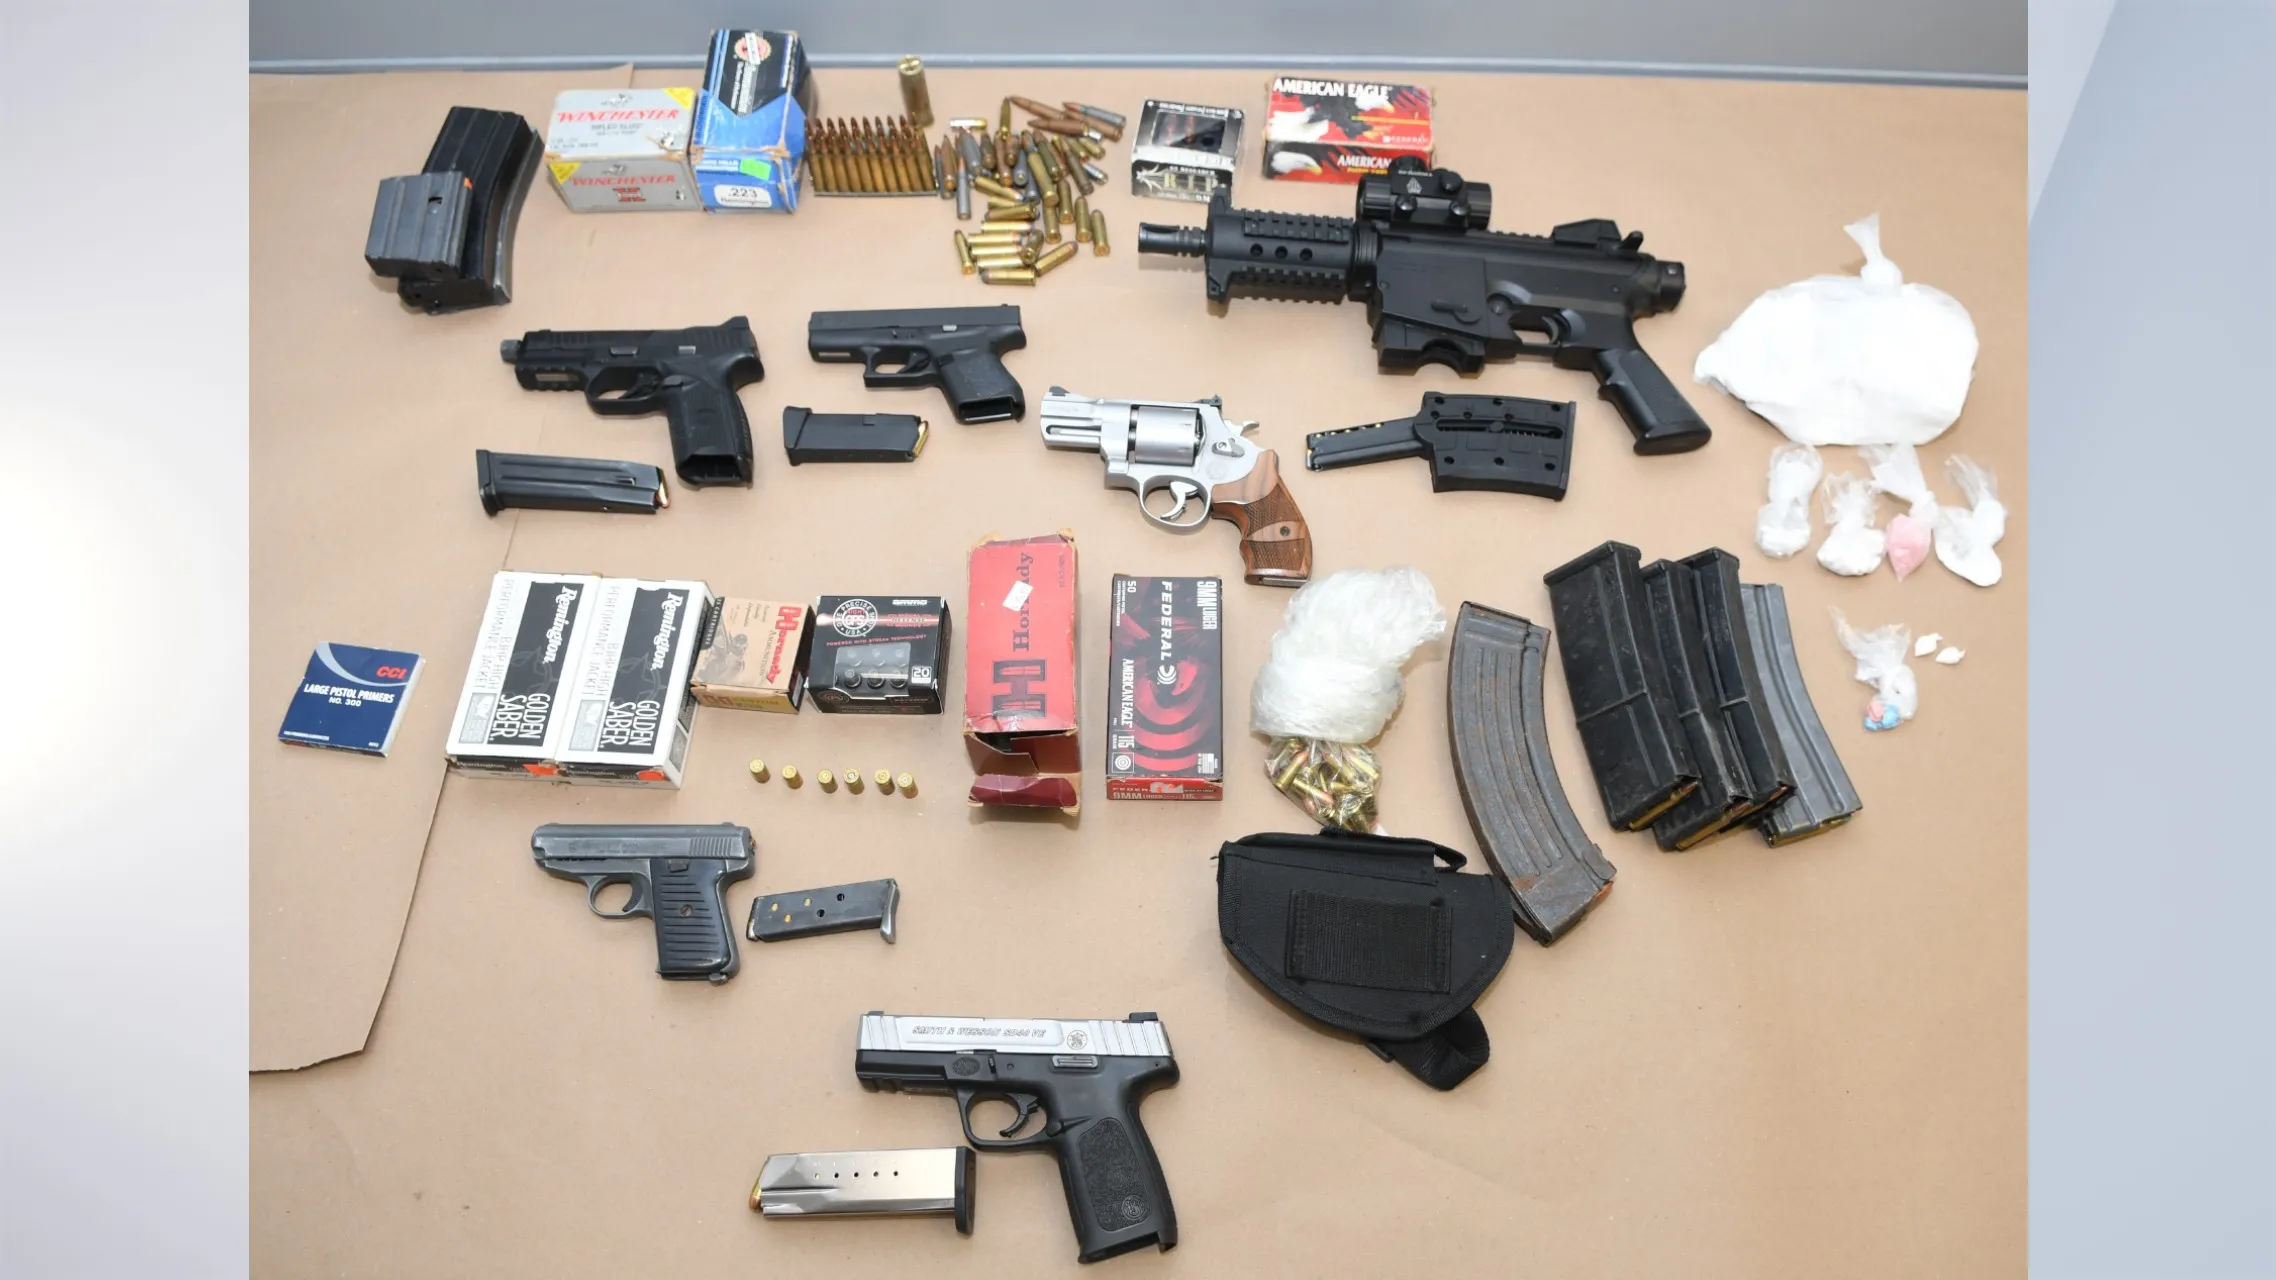 Two Albany Men Nabbed for Serious Firearm and Drug Offenses